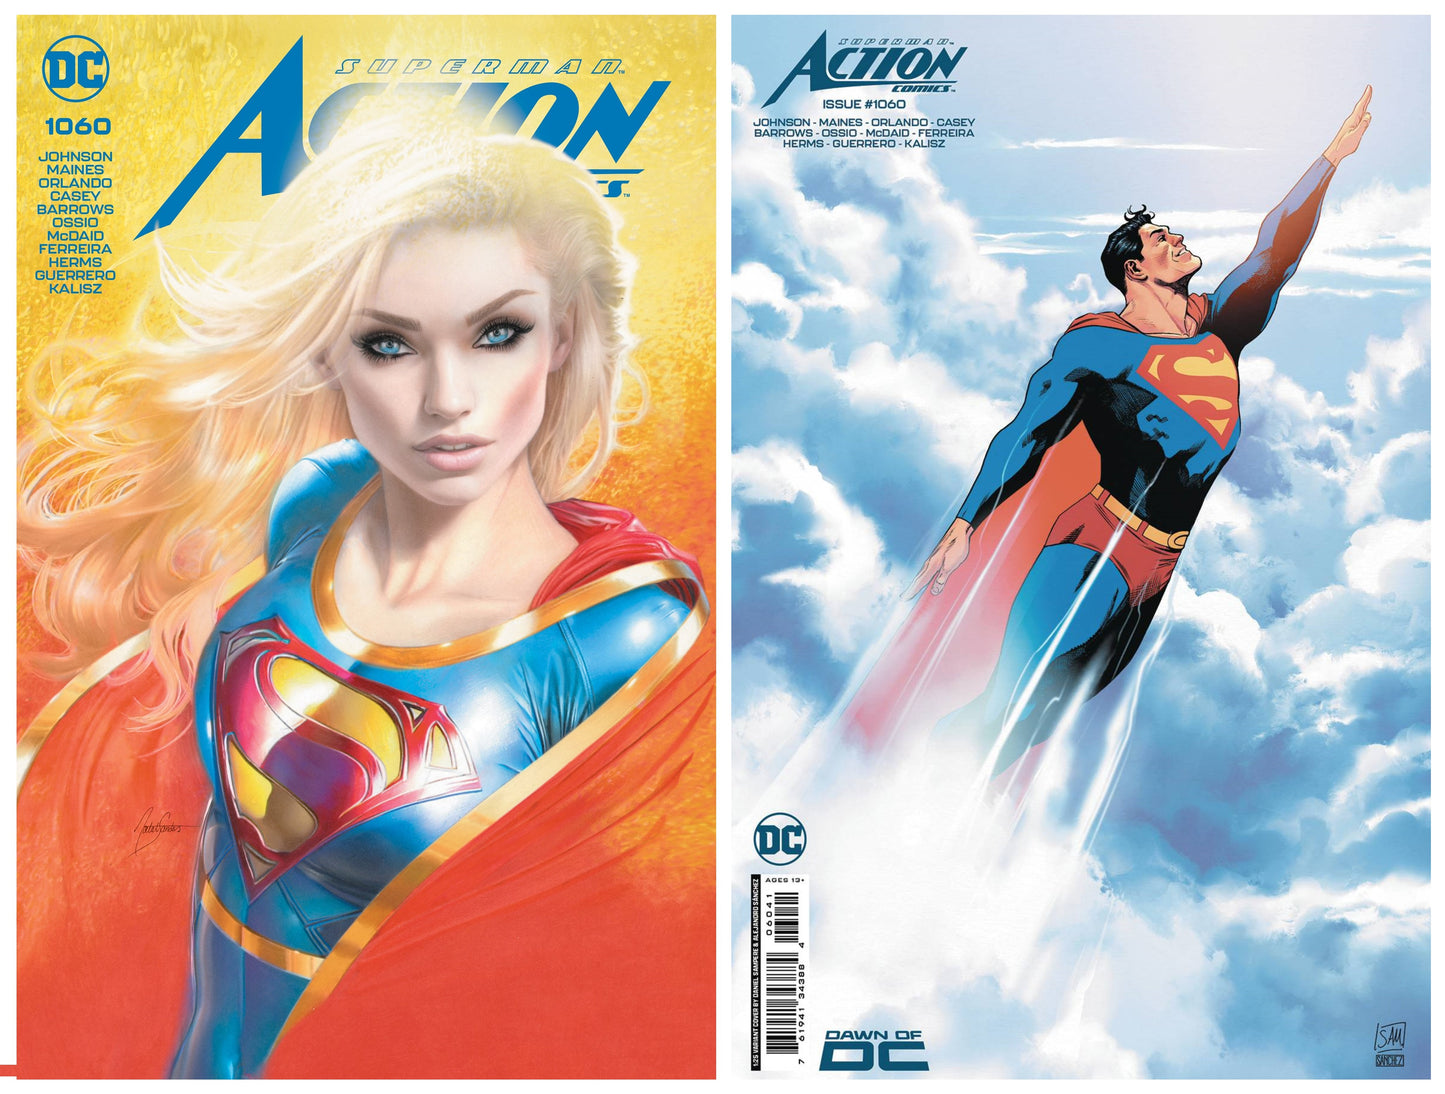 ACTION COMICS #1060 NATALI SANDERS HOMAGE VARIANT LIMITED TO 500 COPIES WITH NUMBERED COA + 1:25 VARIANT